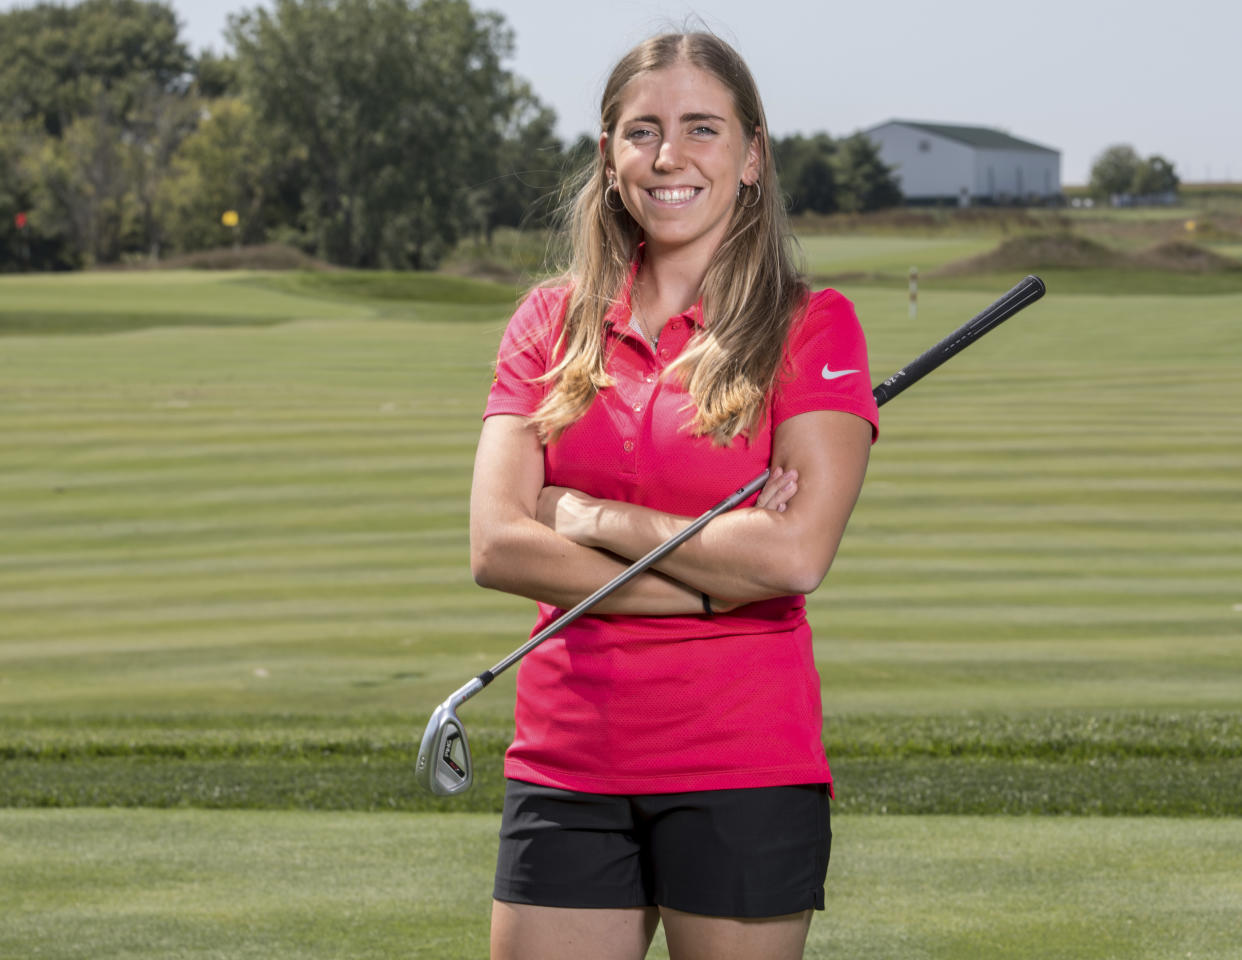 Iowa State golfer Celia Barquin Arozamena was found dead on a golf course on Sept. 17, and investigators have found several knives in connection to her murder. (Luke Lu/Iowa State University via AP, File)